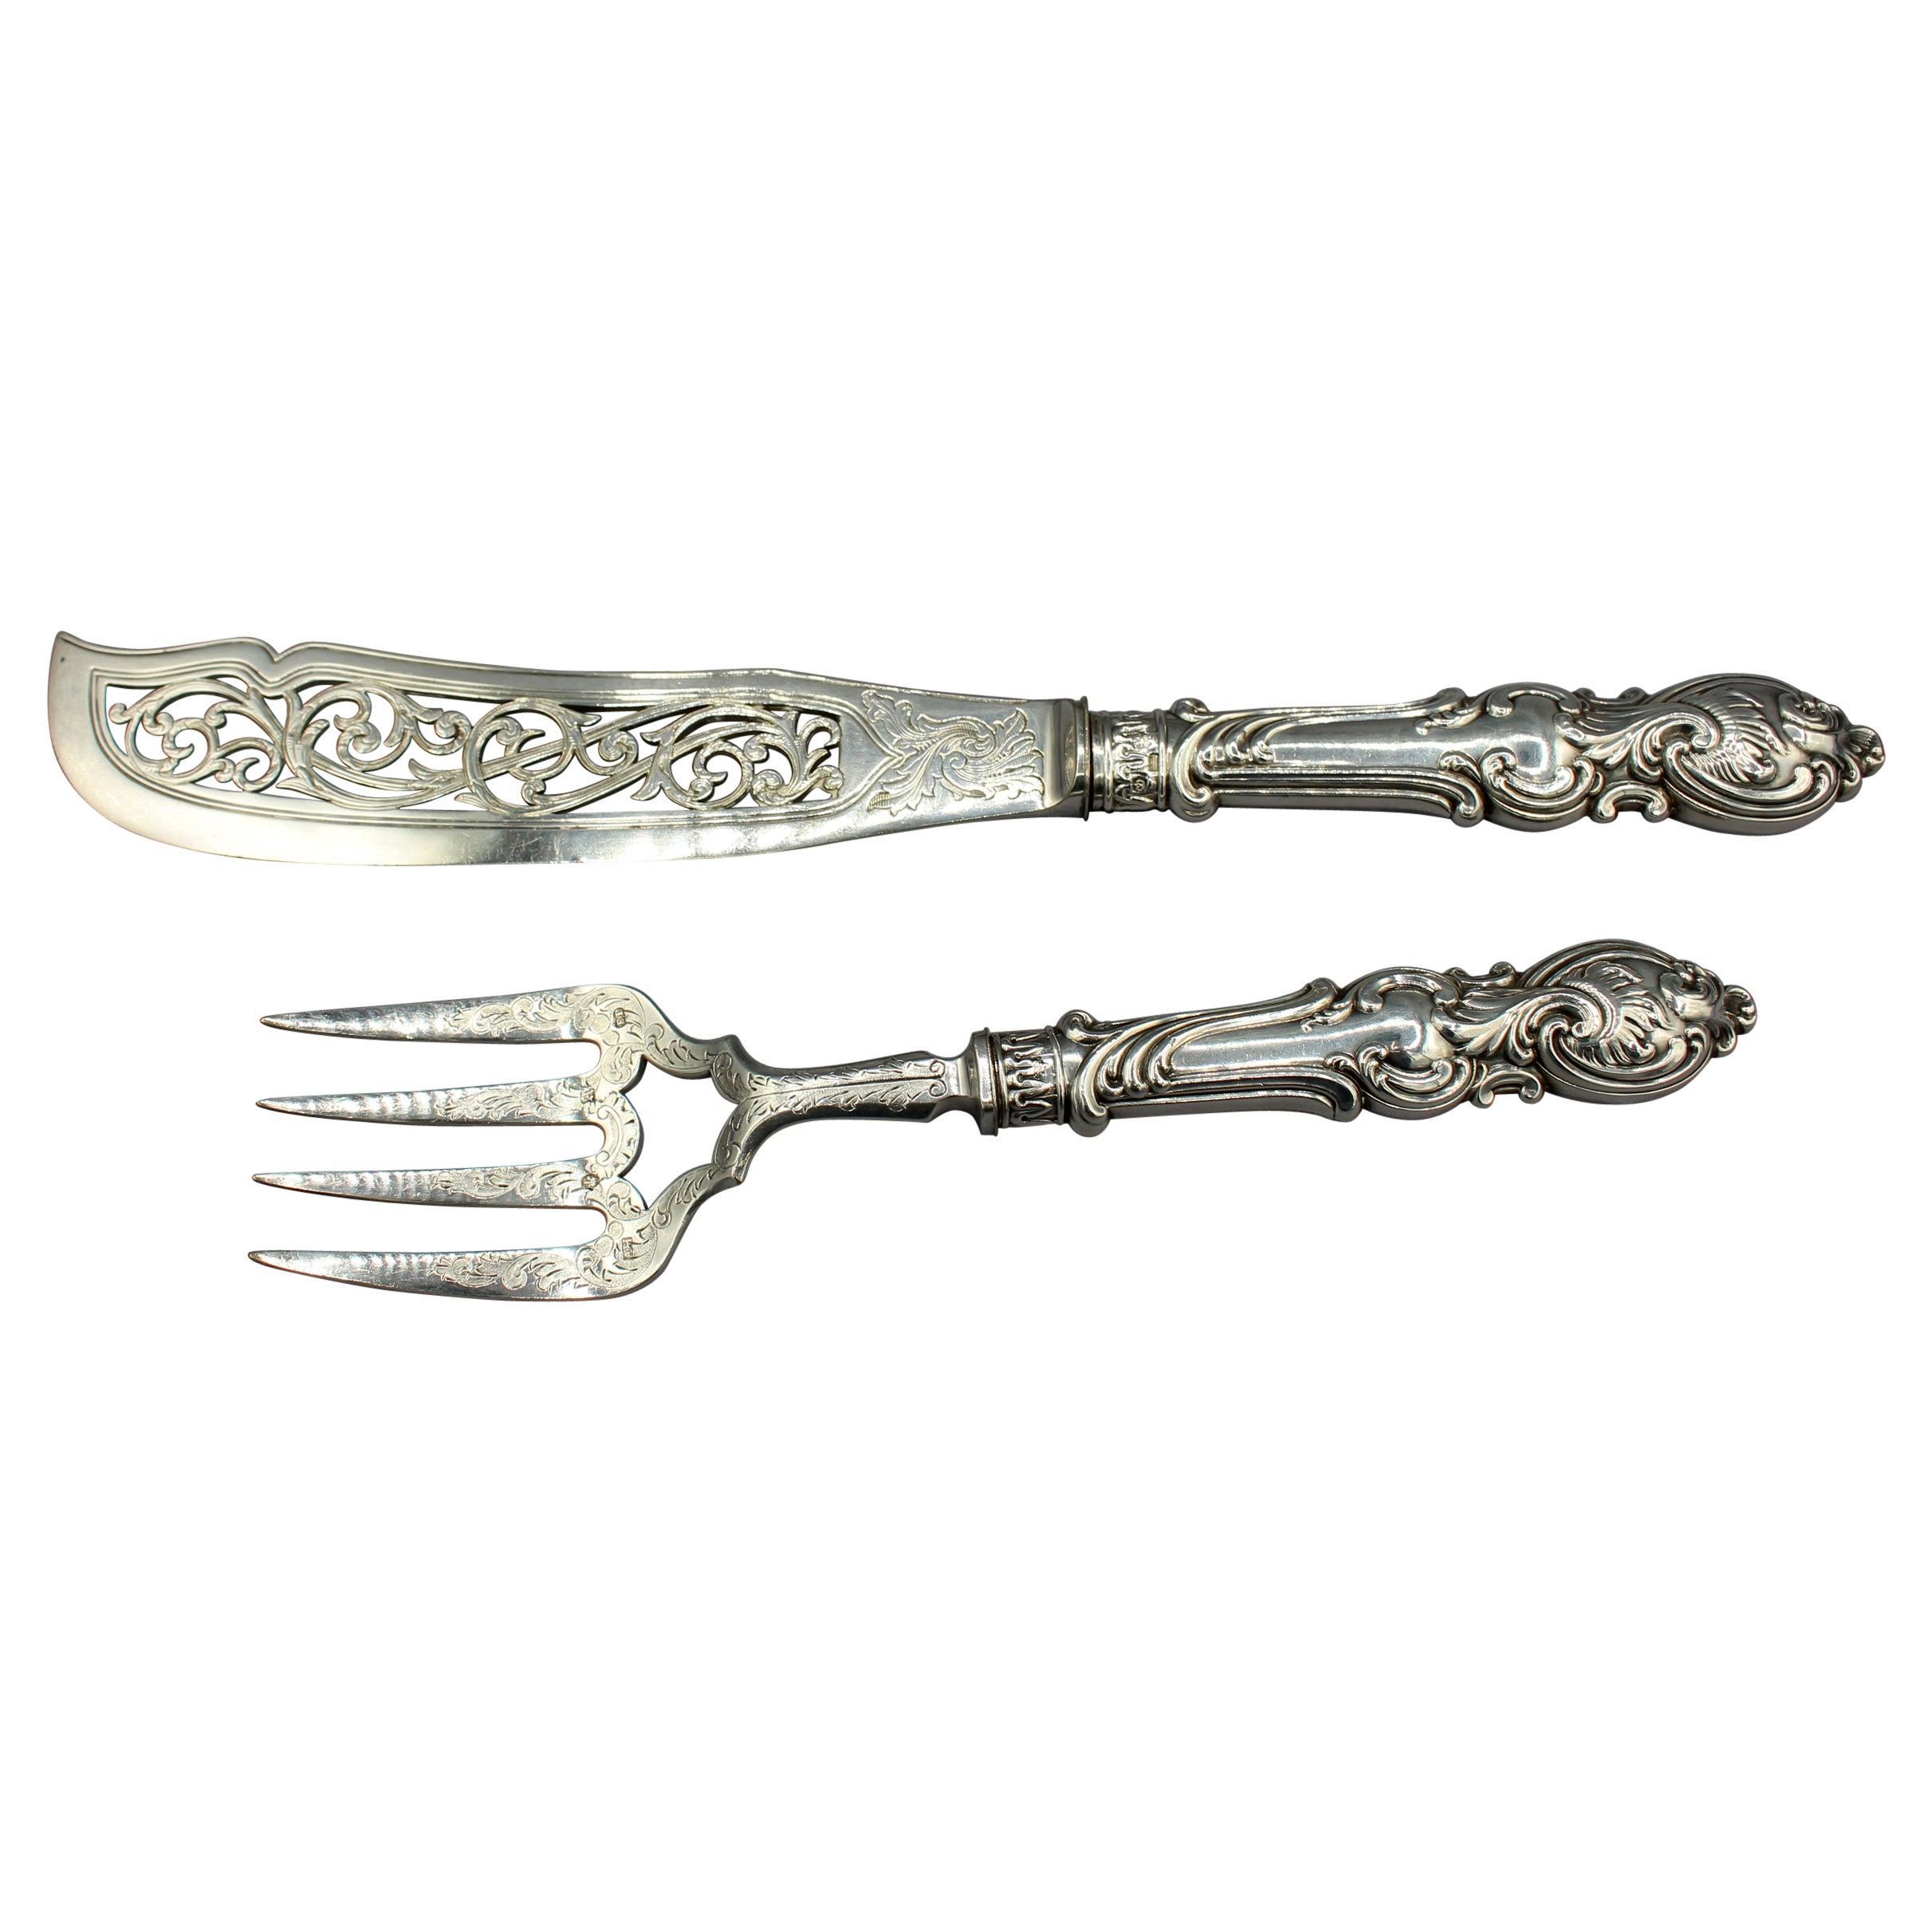 1852 English Sterling Handled Fish Servers by Aaron Hatfield & Sons